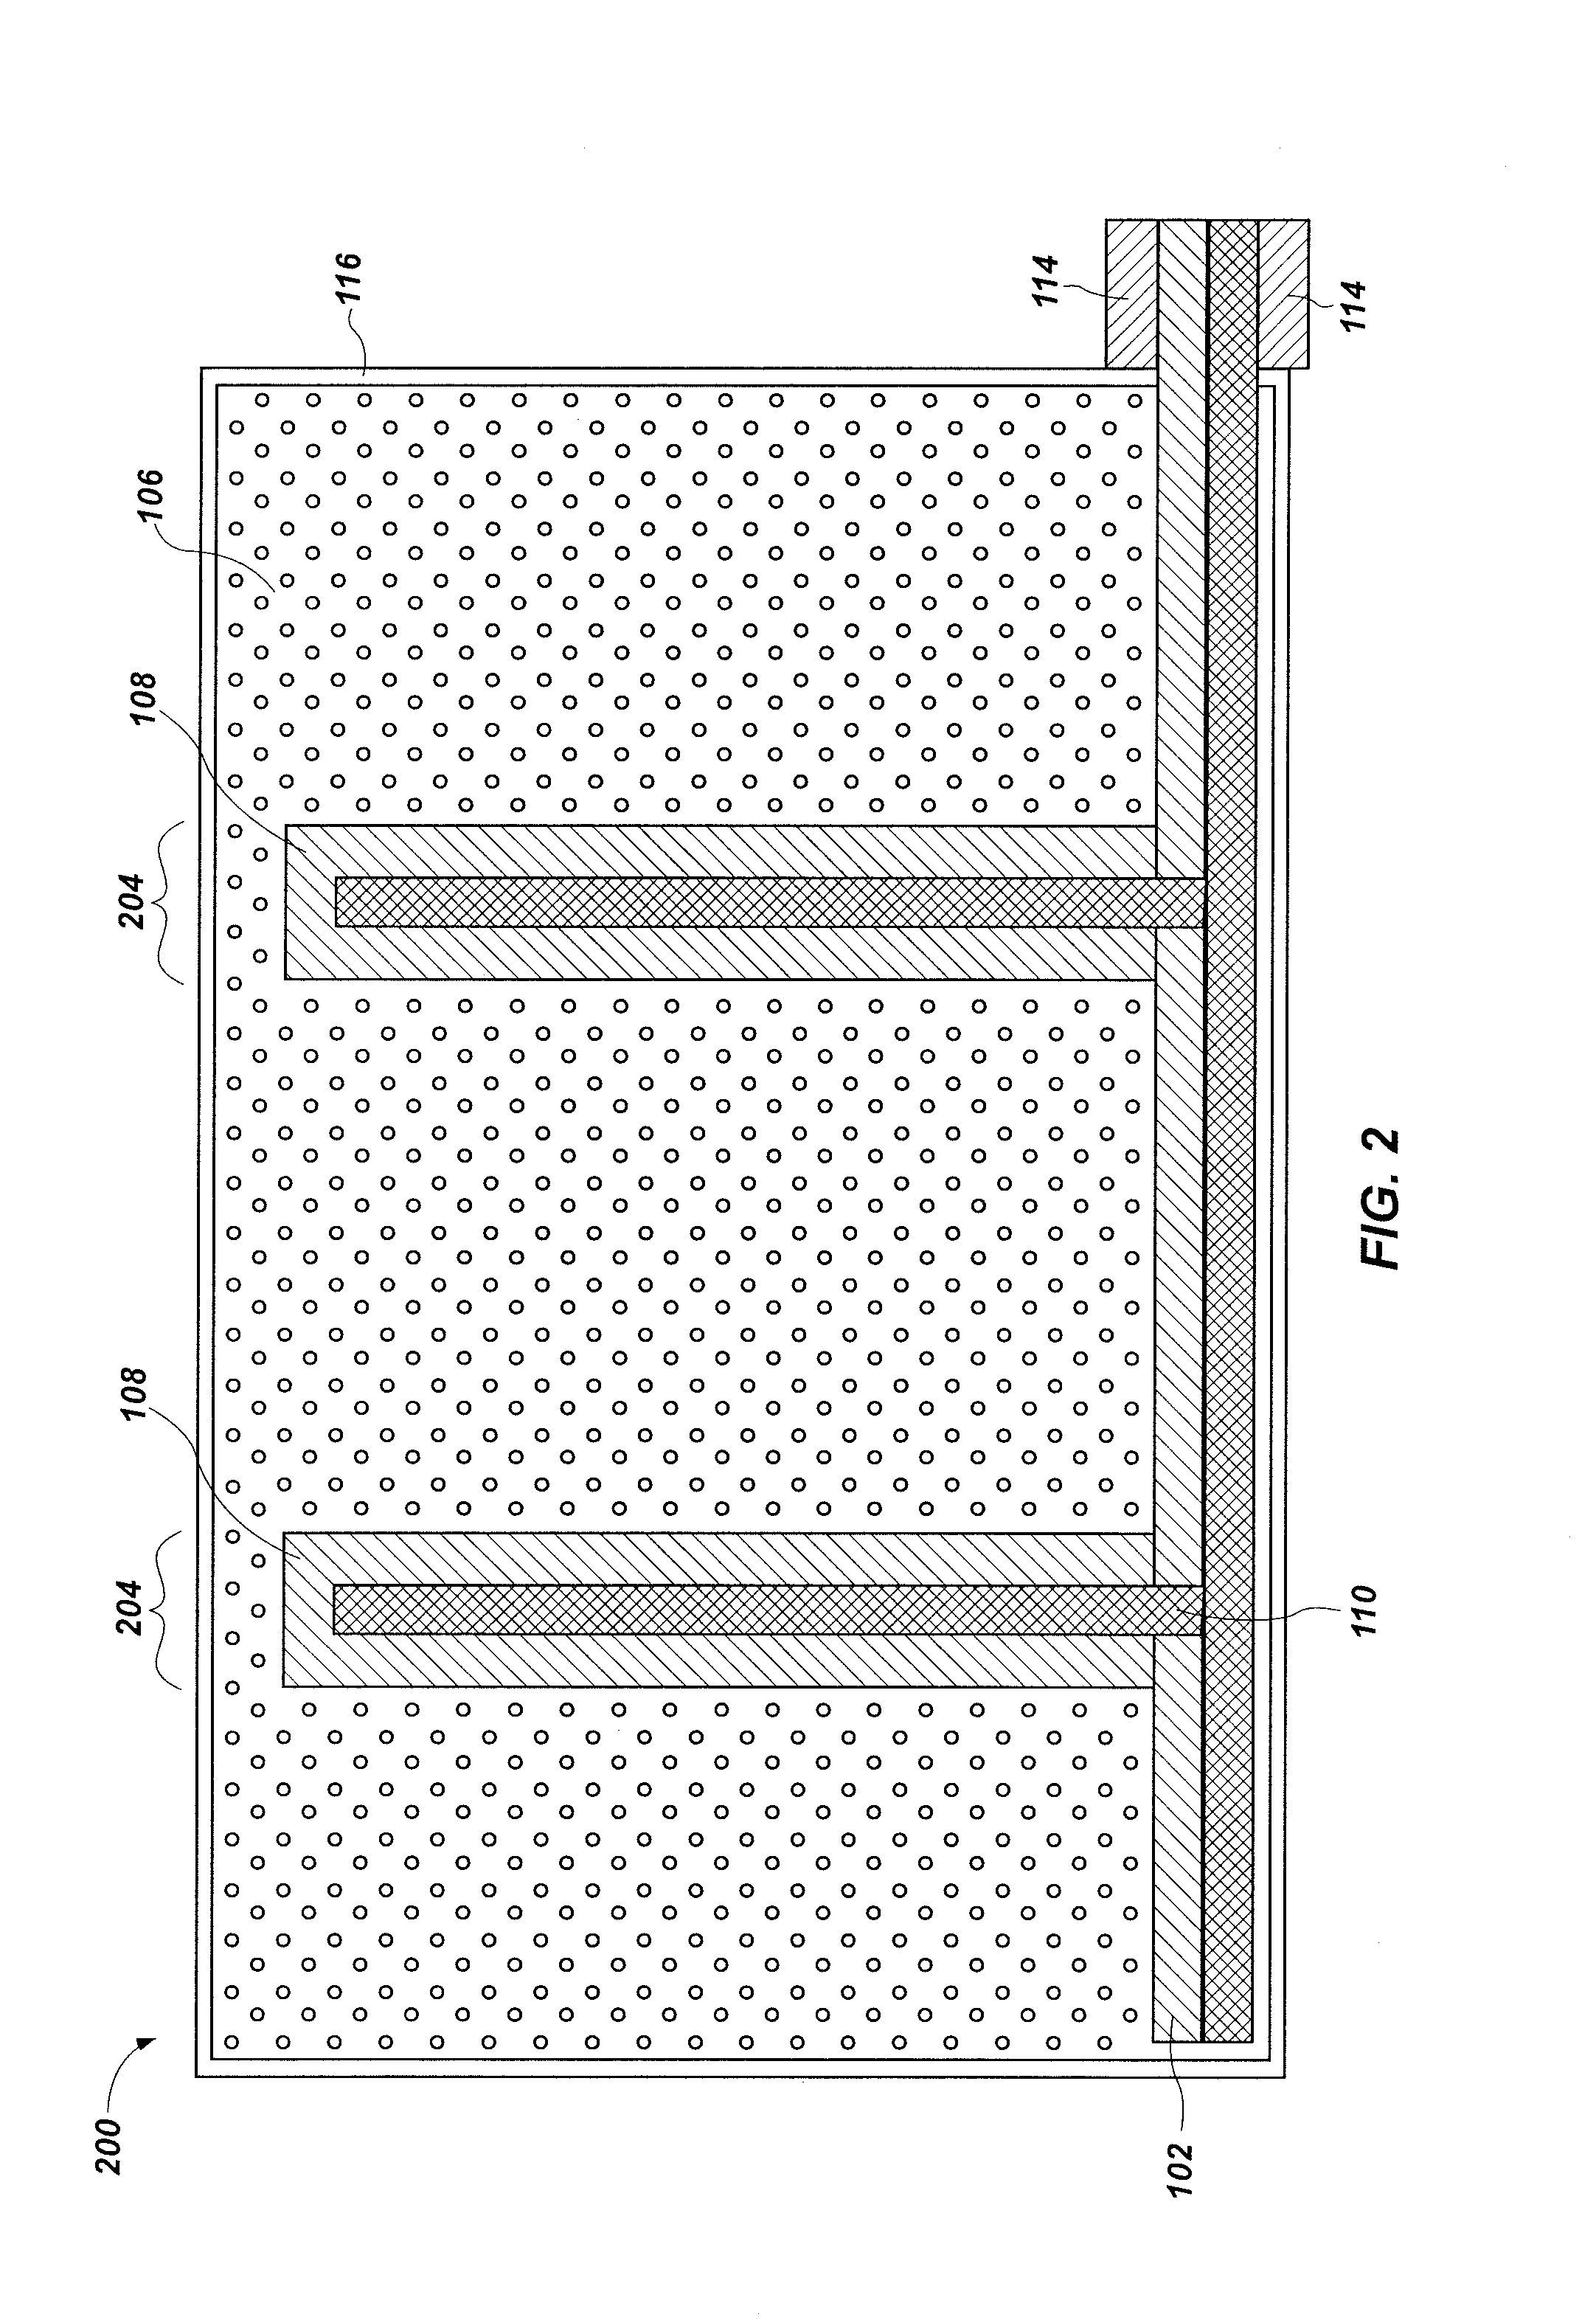 Primary voltaic sources including nanofiber schottky barrier arrays and methods of forming same